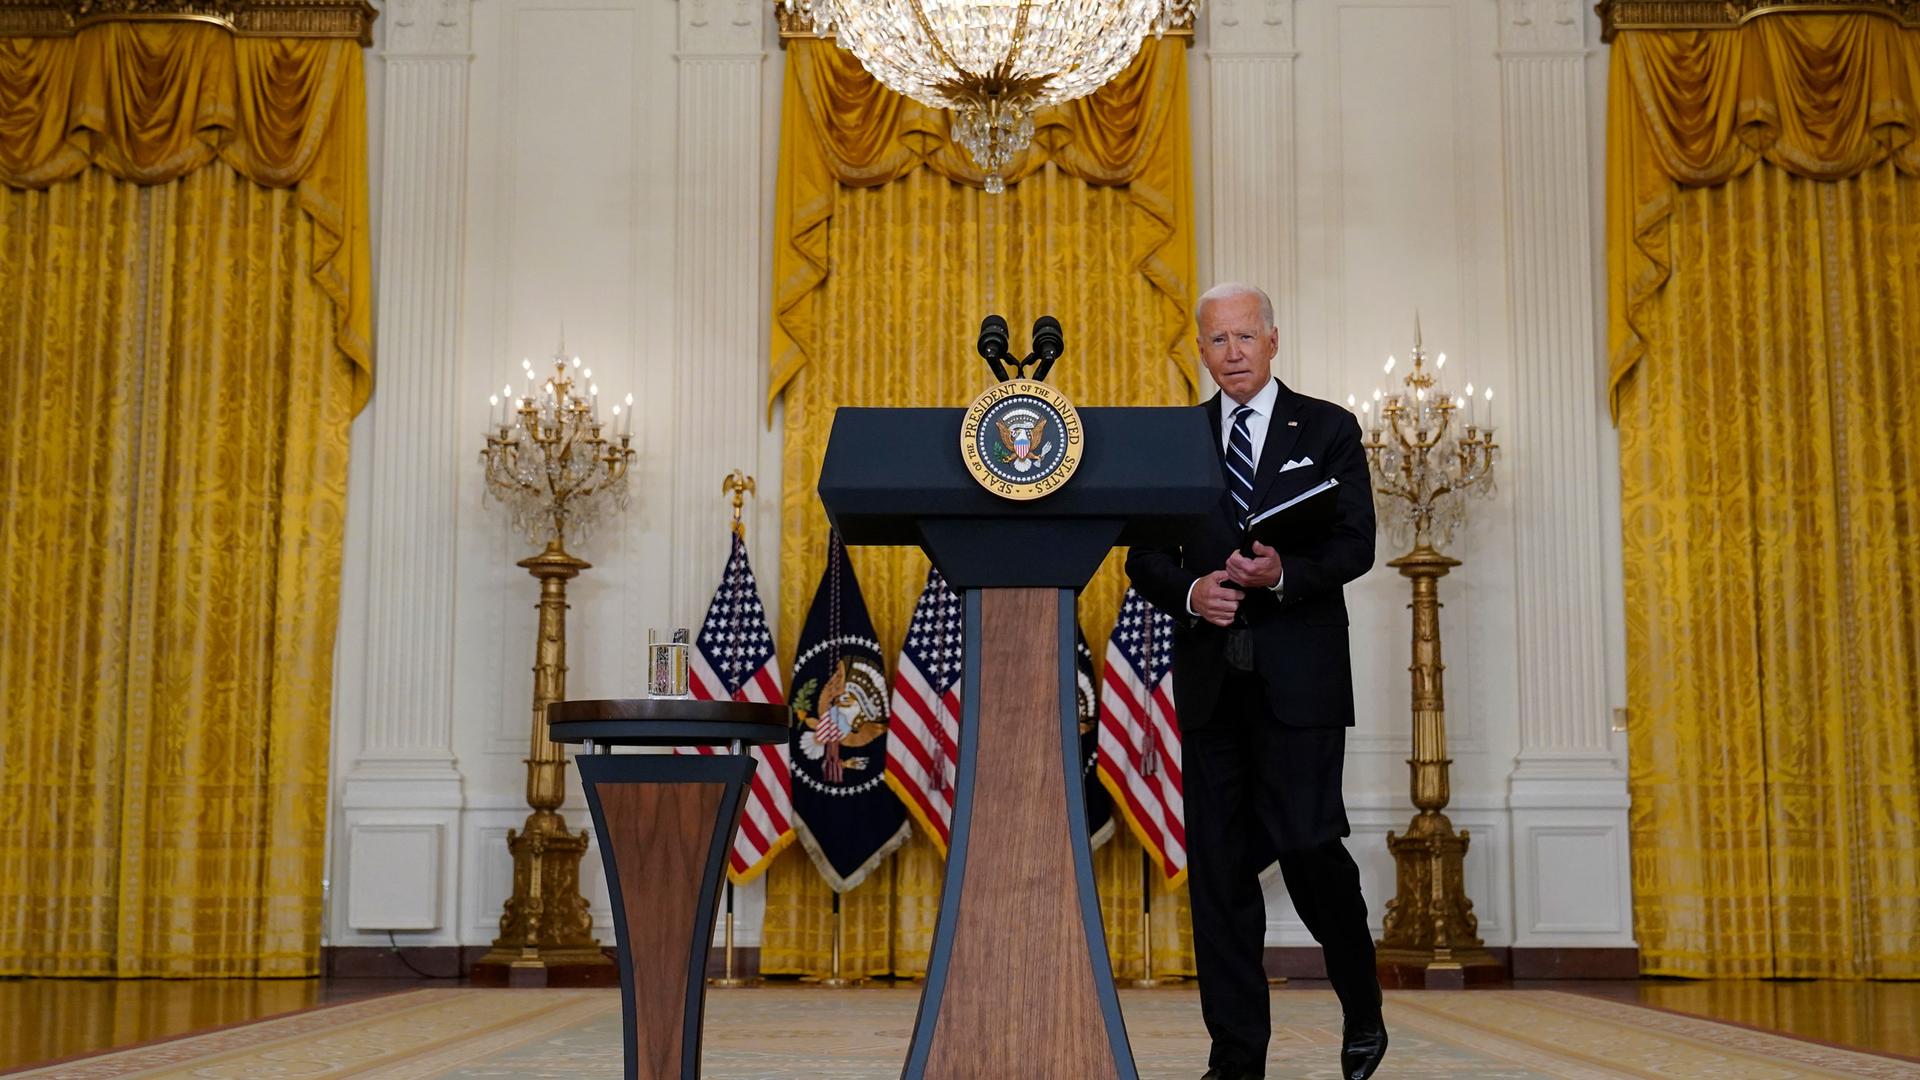 US President Joe Biden is shown walking toward a podium with the seal of the US presidency and holding a folder.